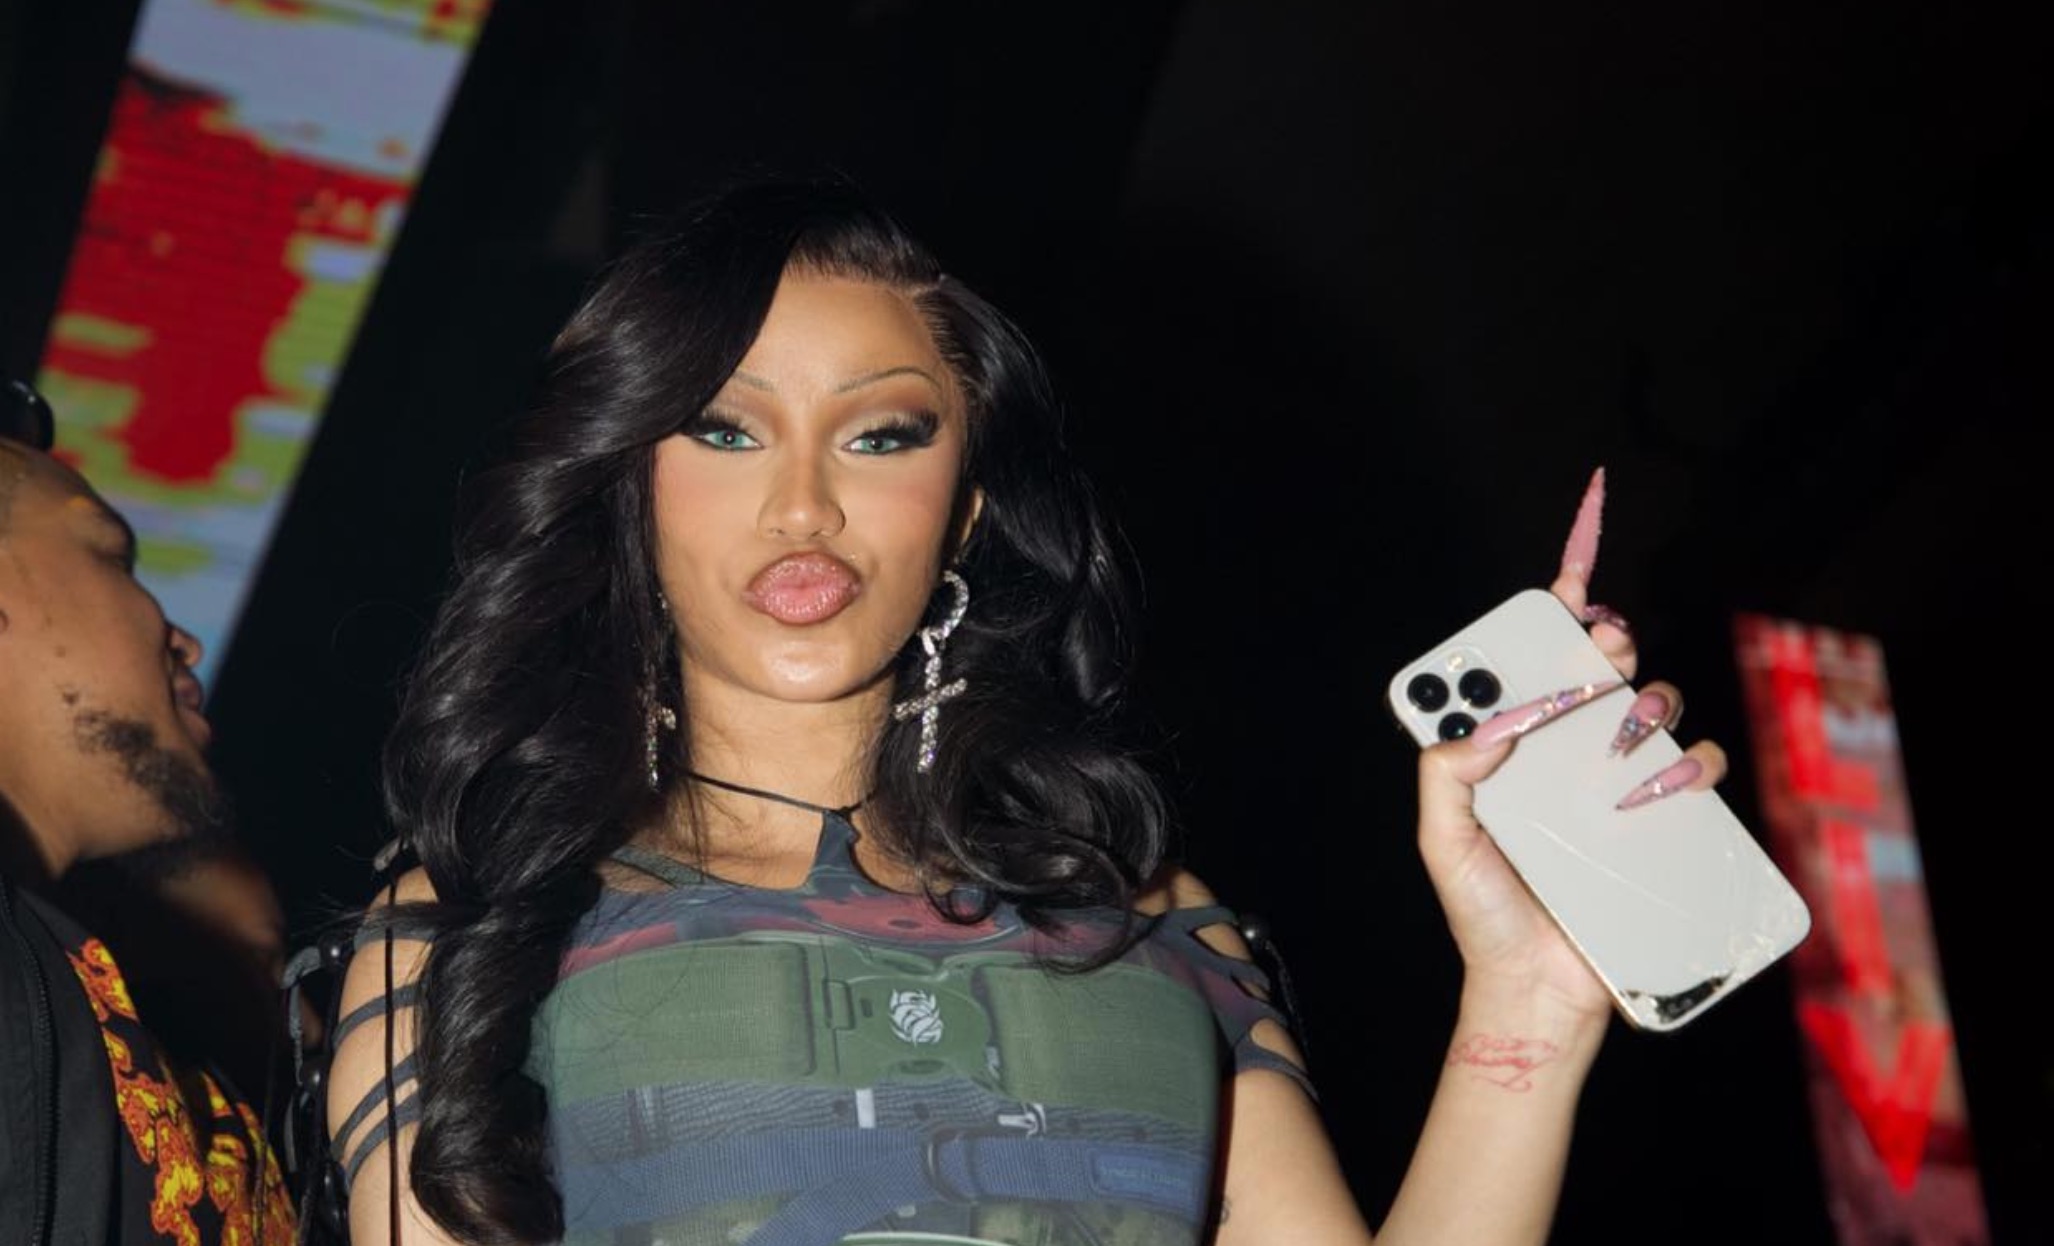 Cardi B, Offset 'not together' but did have sex New Year's Eve